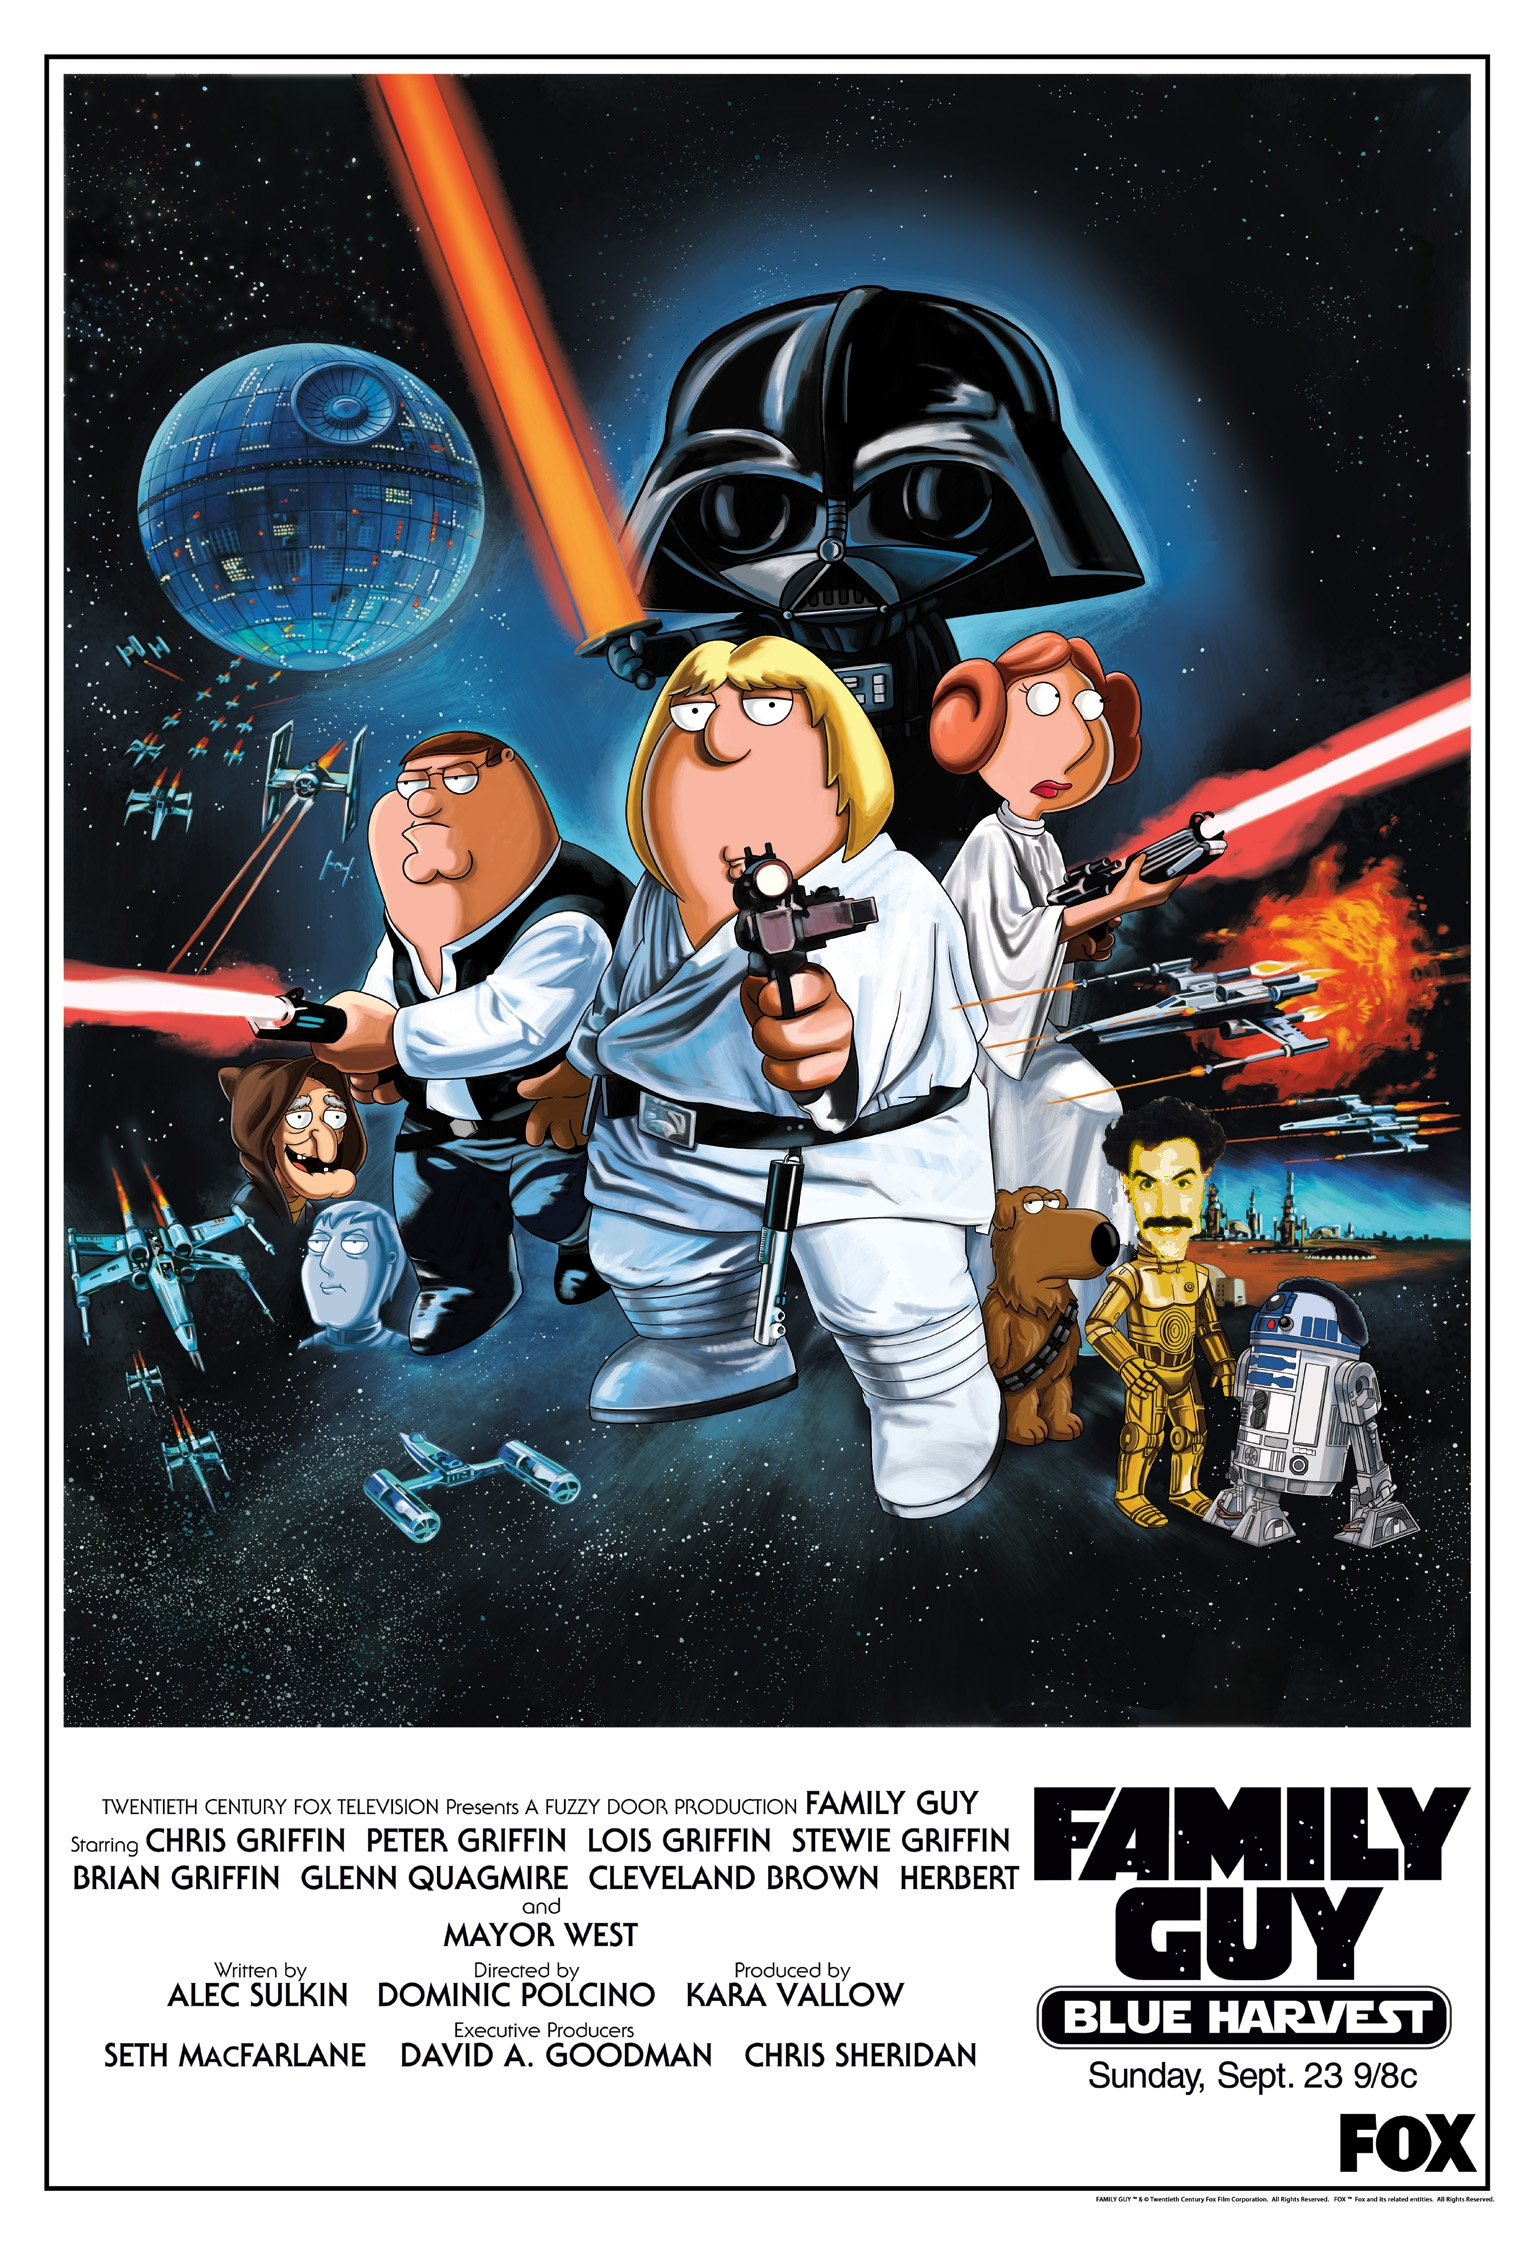 Star Wars Wallpaper on Viewing Star Wars Family Guy Hd Wallpaper Color Palette Tags Star Wars